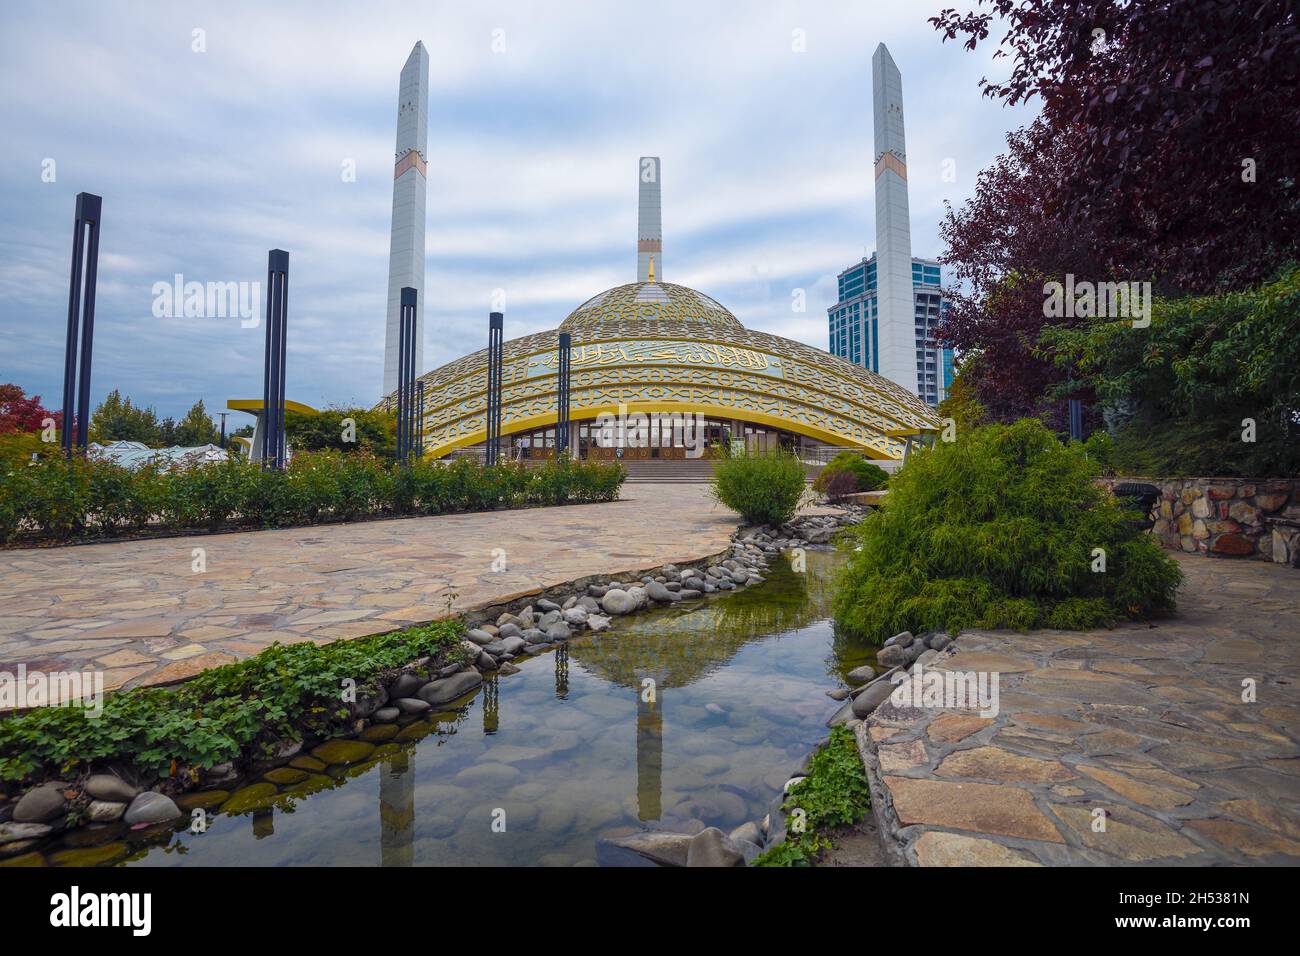 ARGUN, RUSSIA - SEPTEMBER 28, 2021: View of the modern mosque 'Mother's Heart' on a cloudy September day Stock Photo